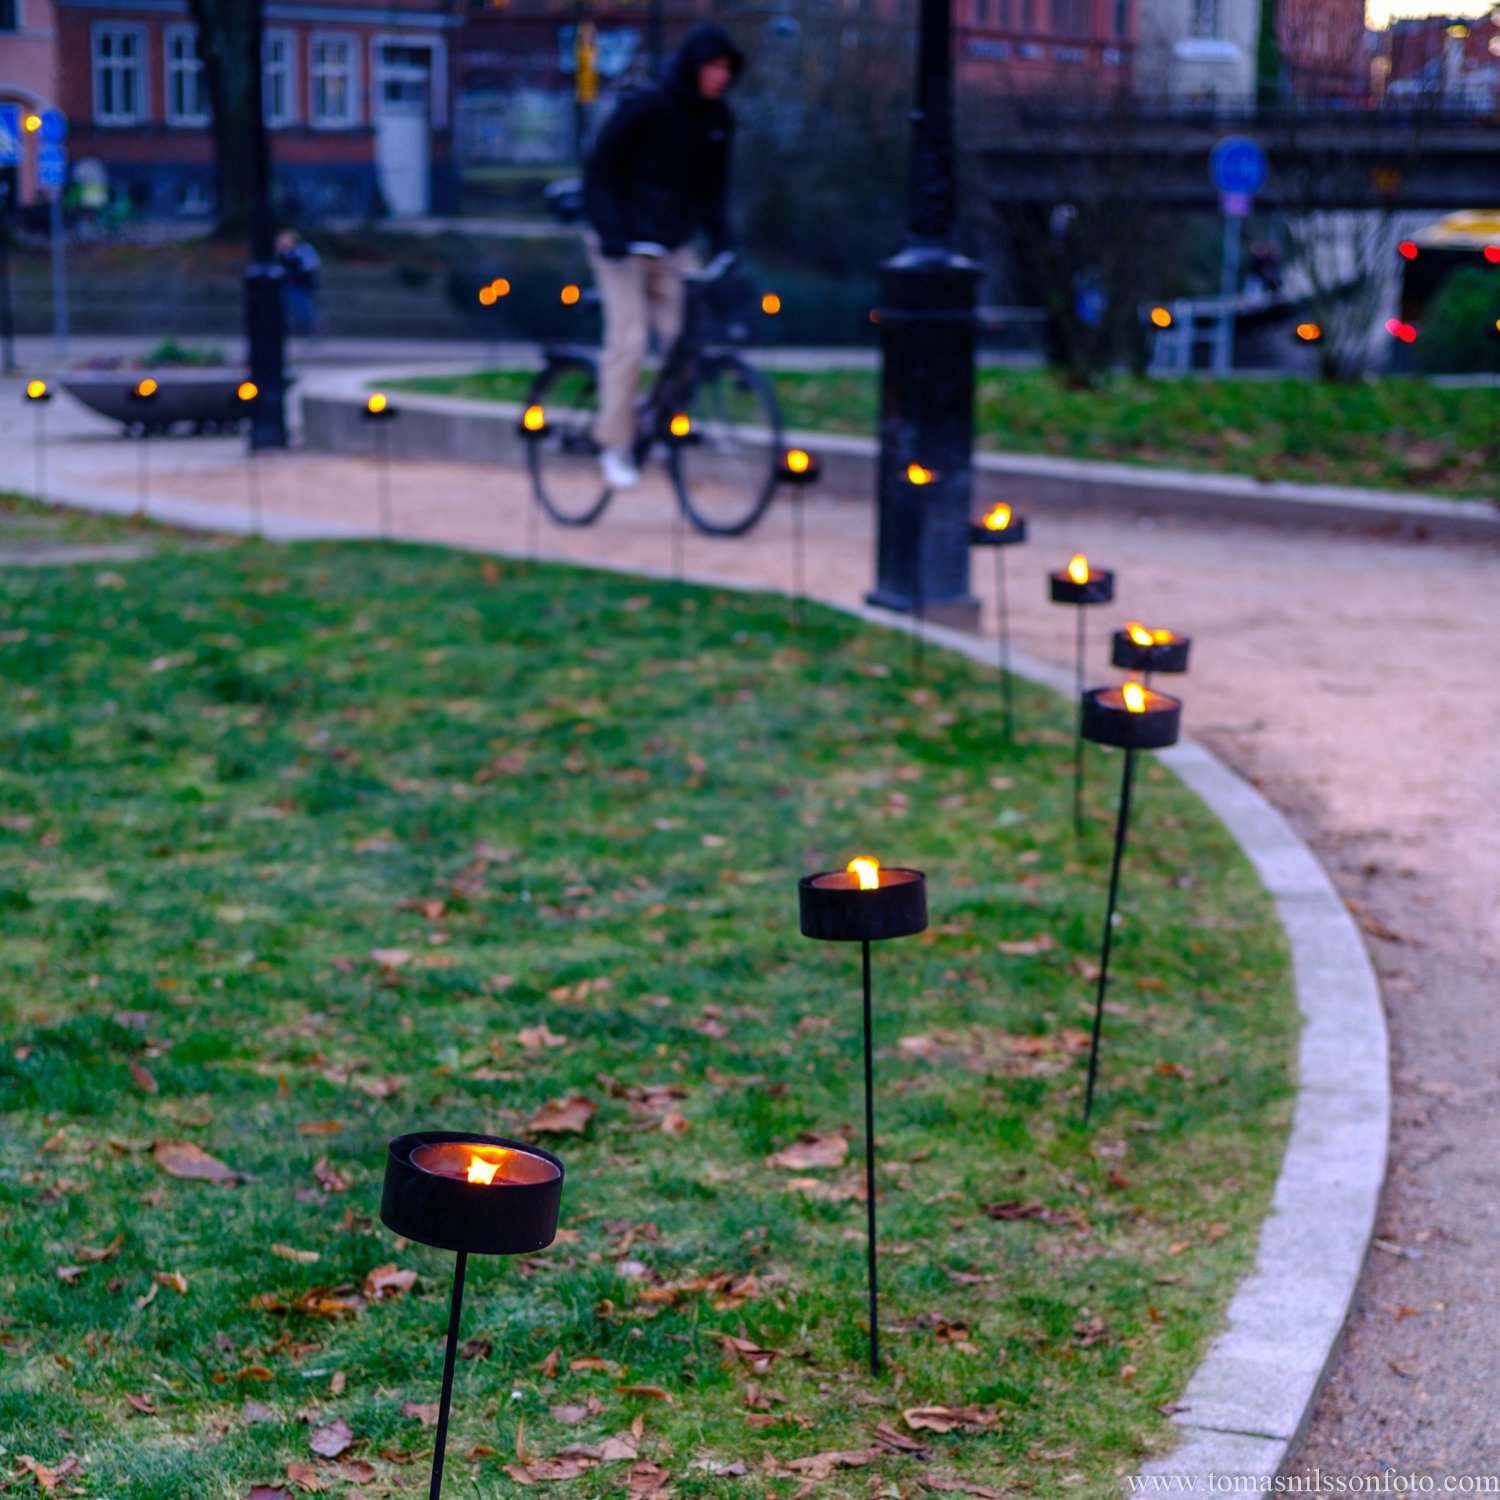 Day 353 - December 19: Torches showing the way